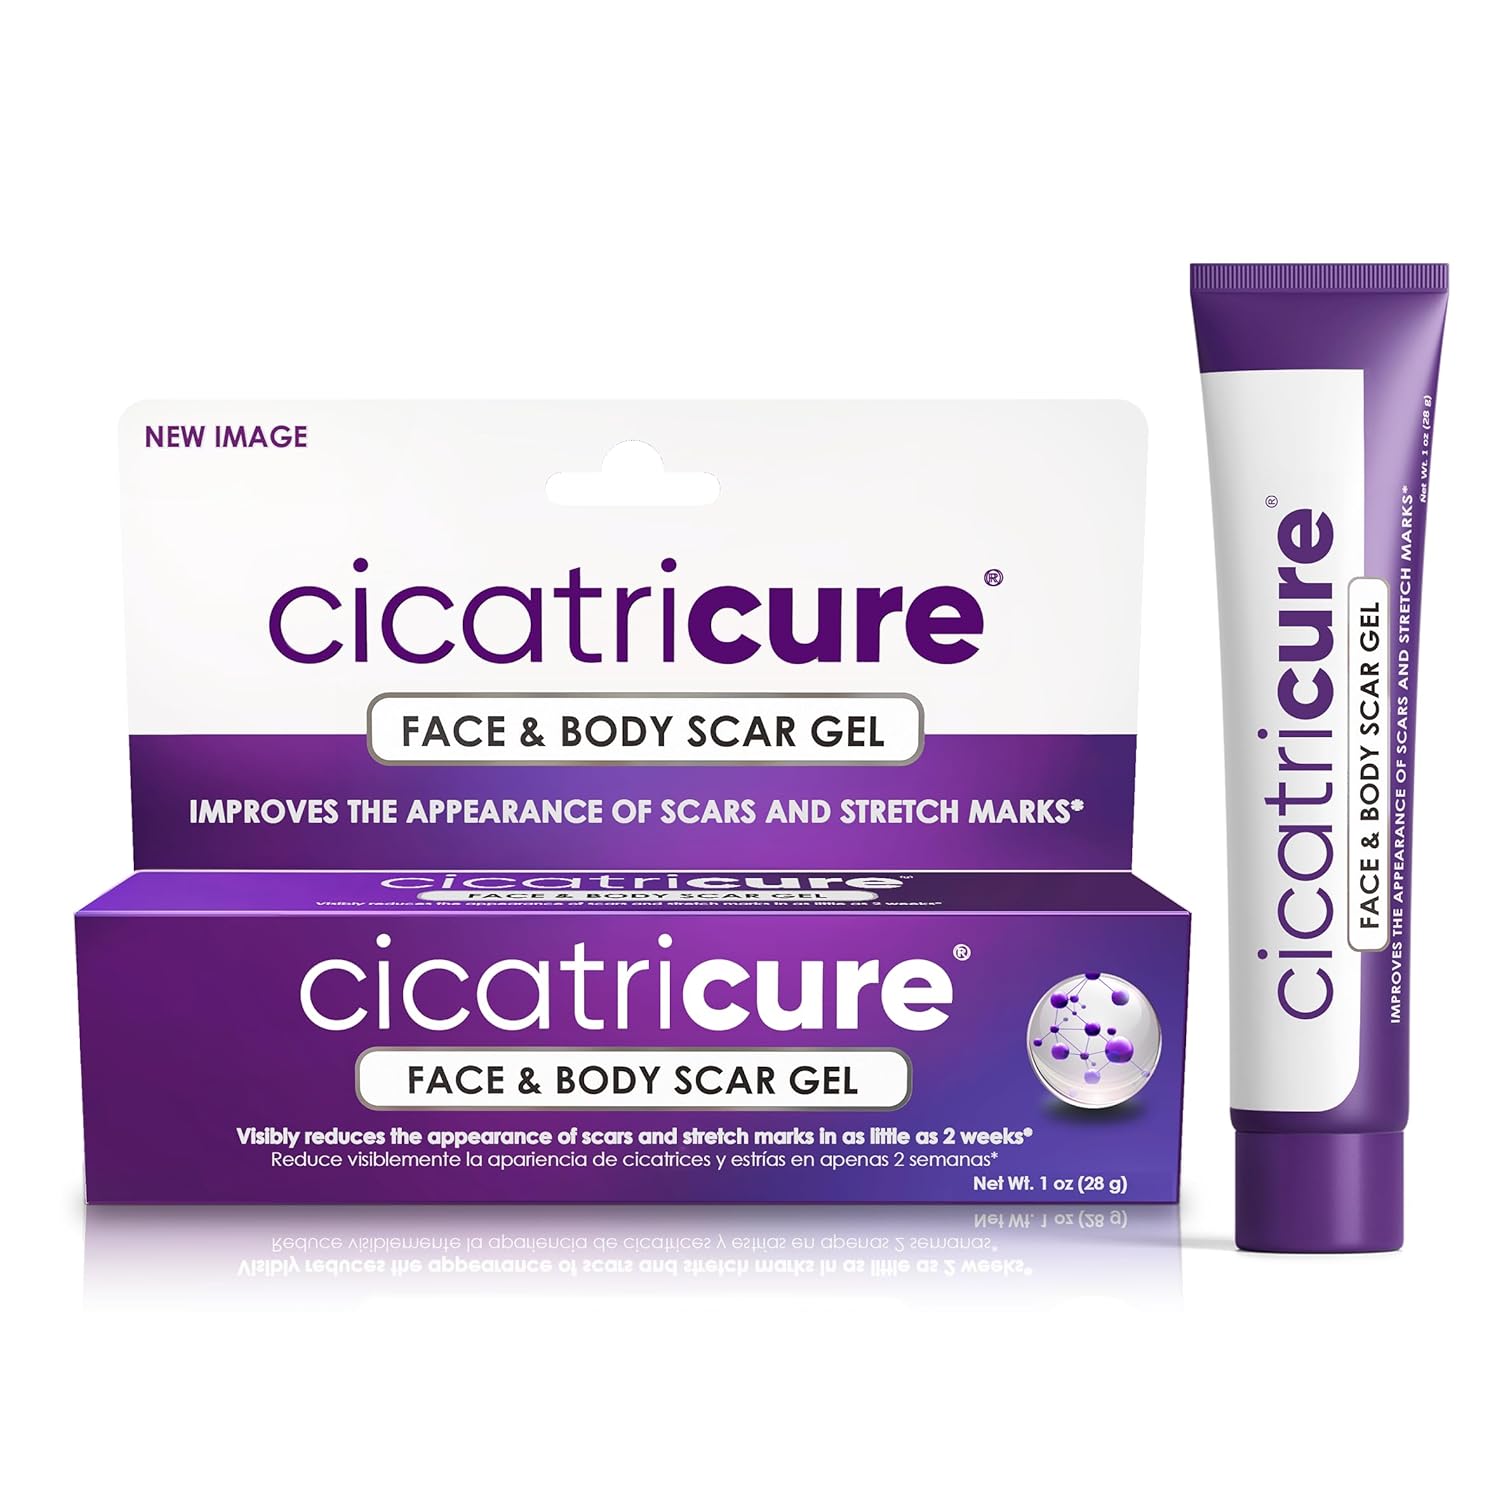 Cicatricure Face & Body Scar Gel, Reduces the Appearance of Old & New Scars, Stretch Marks, 